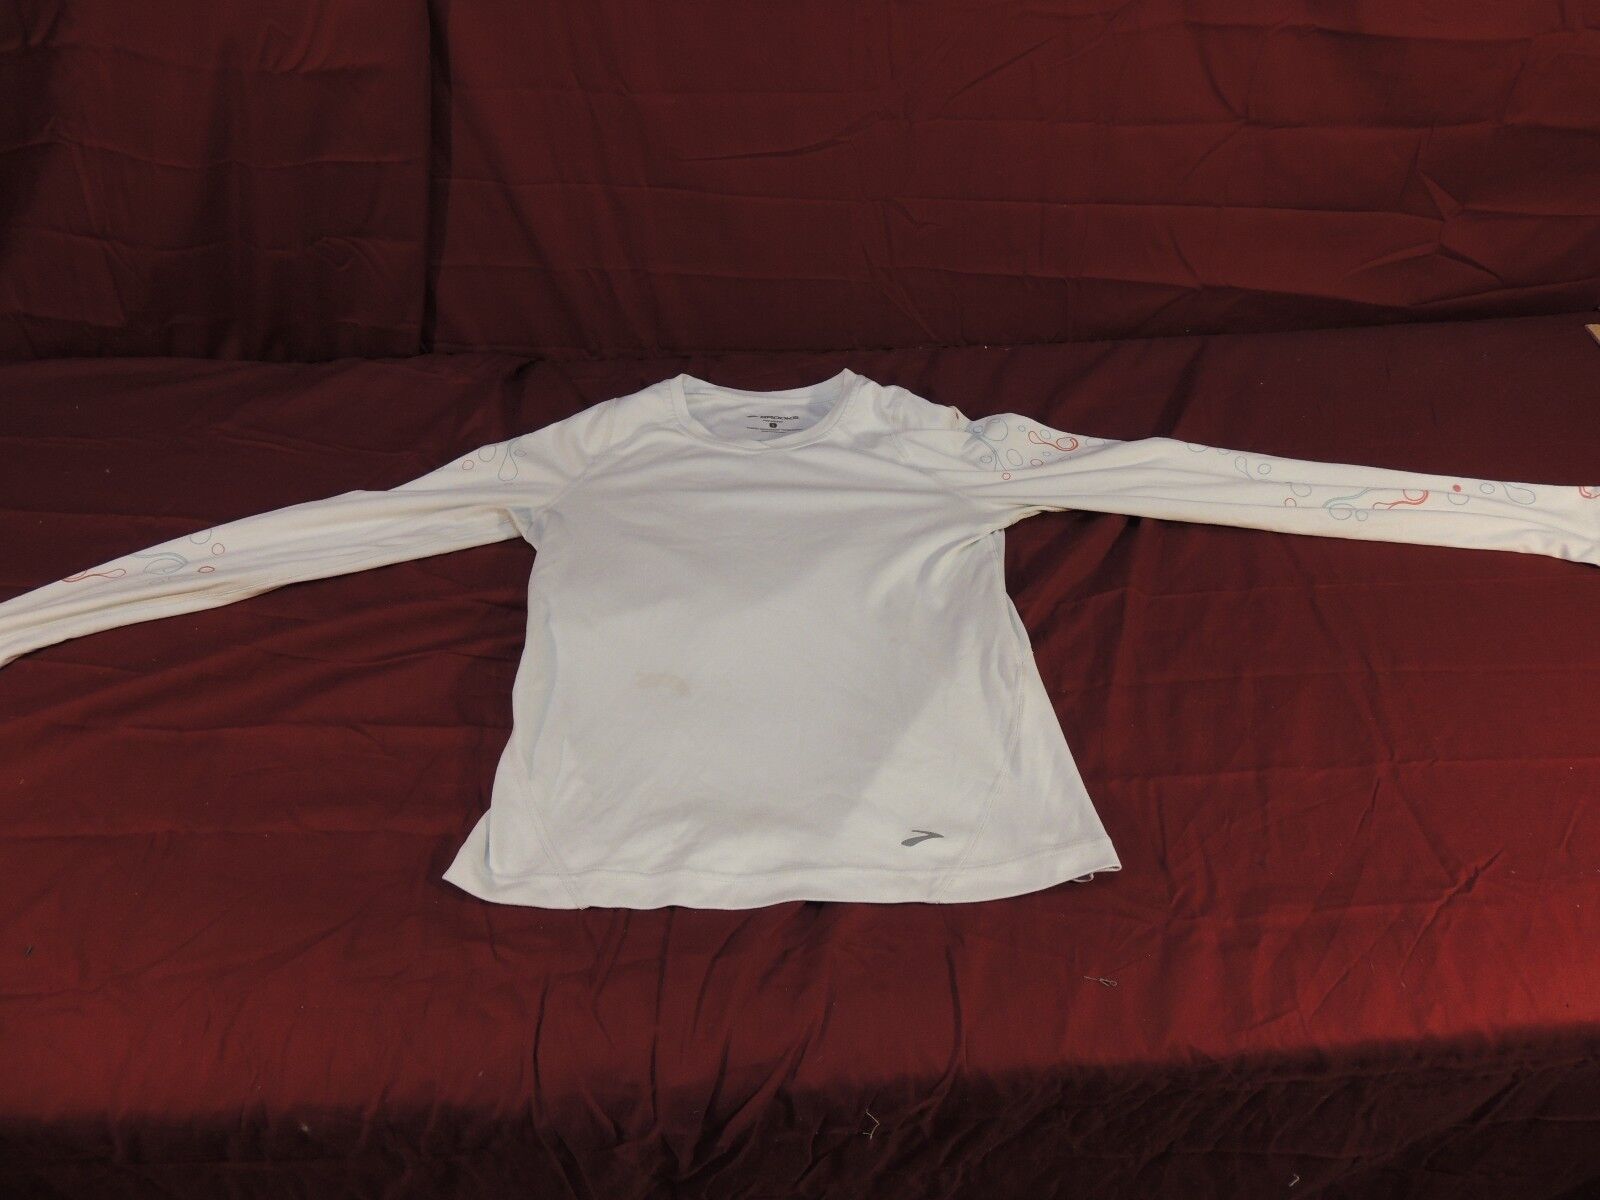 Primary image for Brooks Equilibrium Technology Shirt Women's Size Small wc 12633